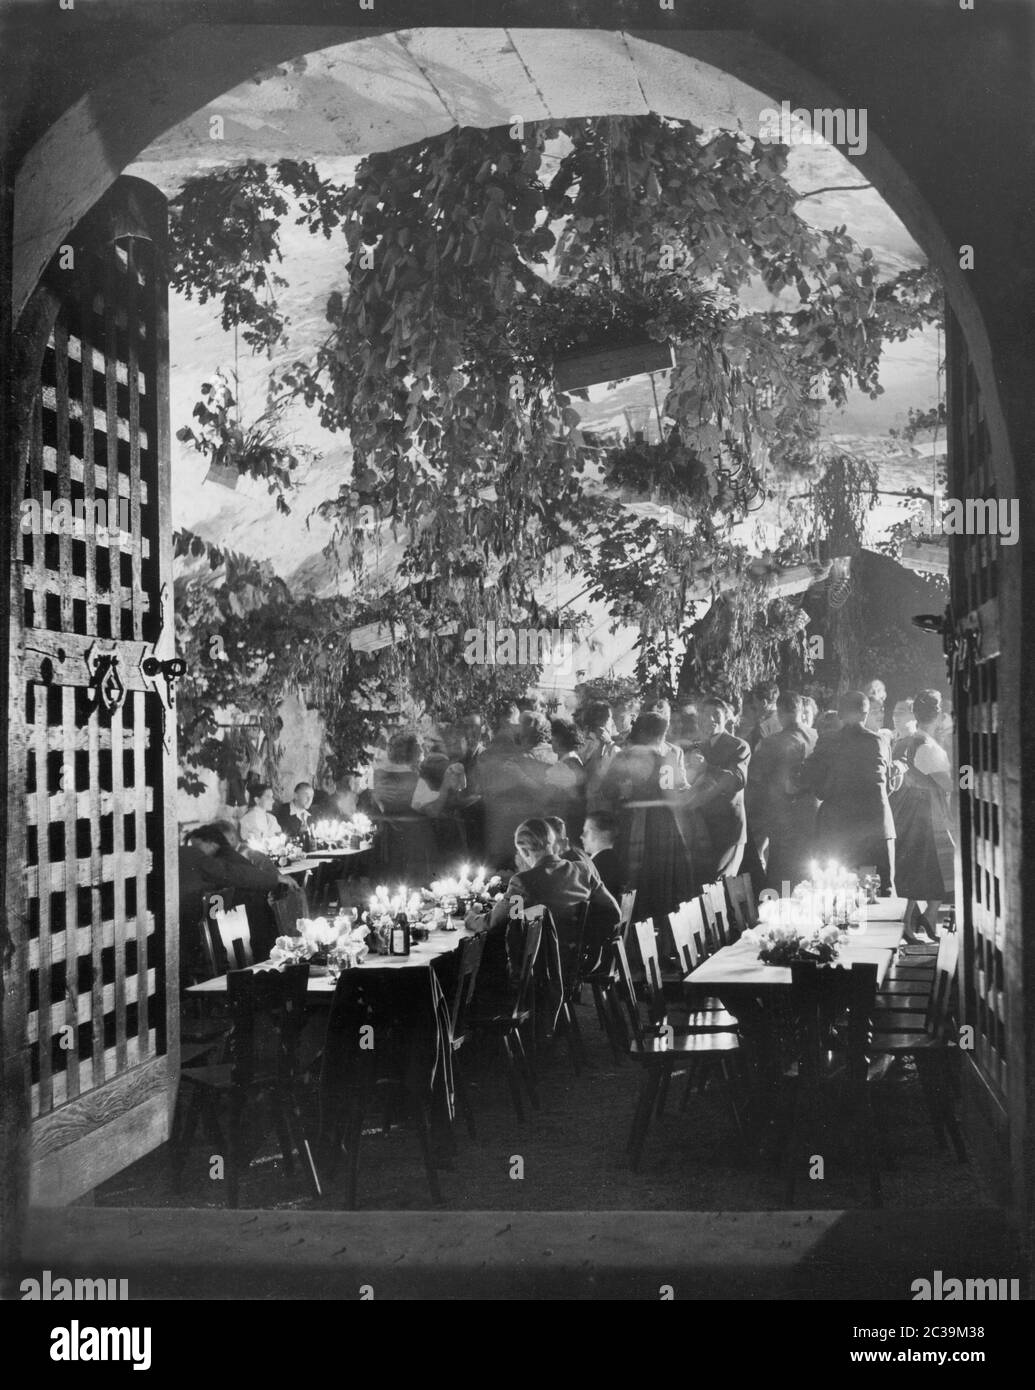 A festive event in a restaurant. Some of the women wear Bavarian dirndls. Undated photo. Stock Photo